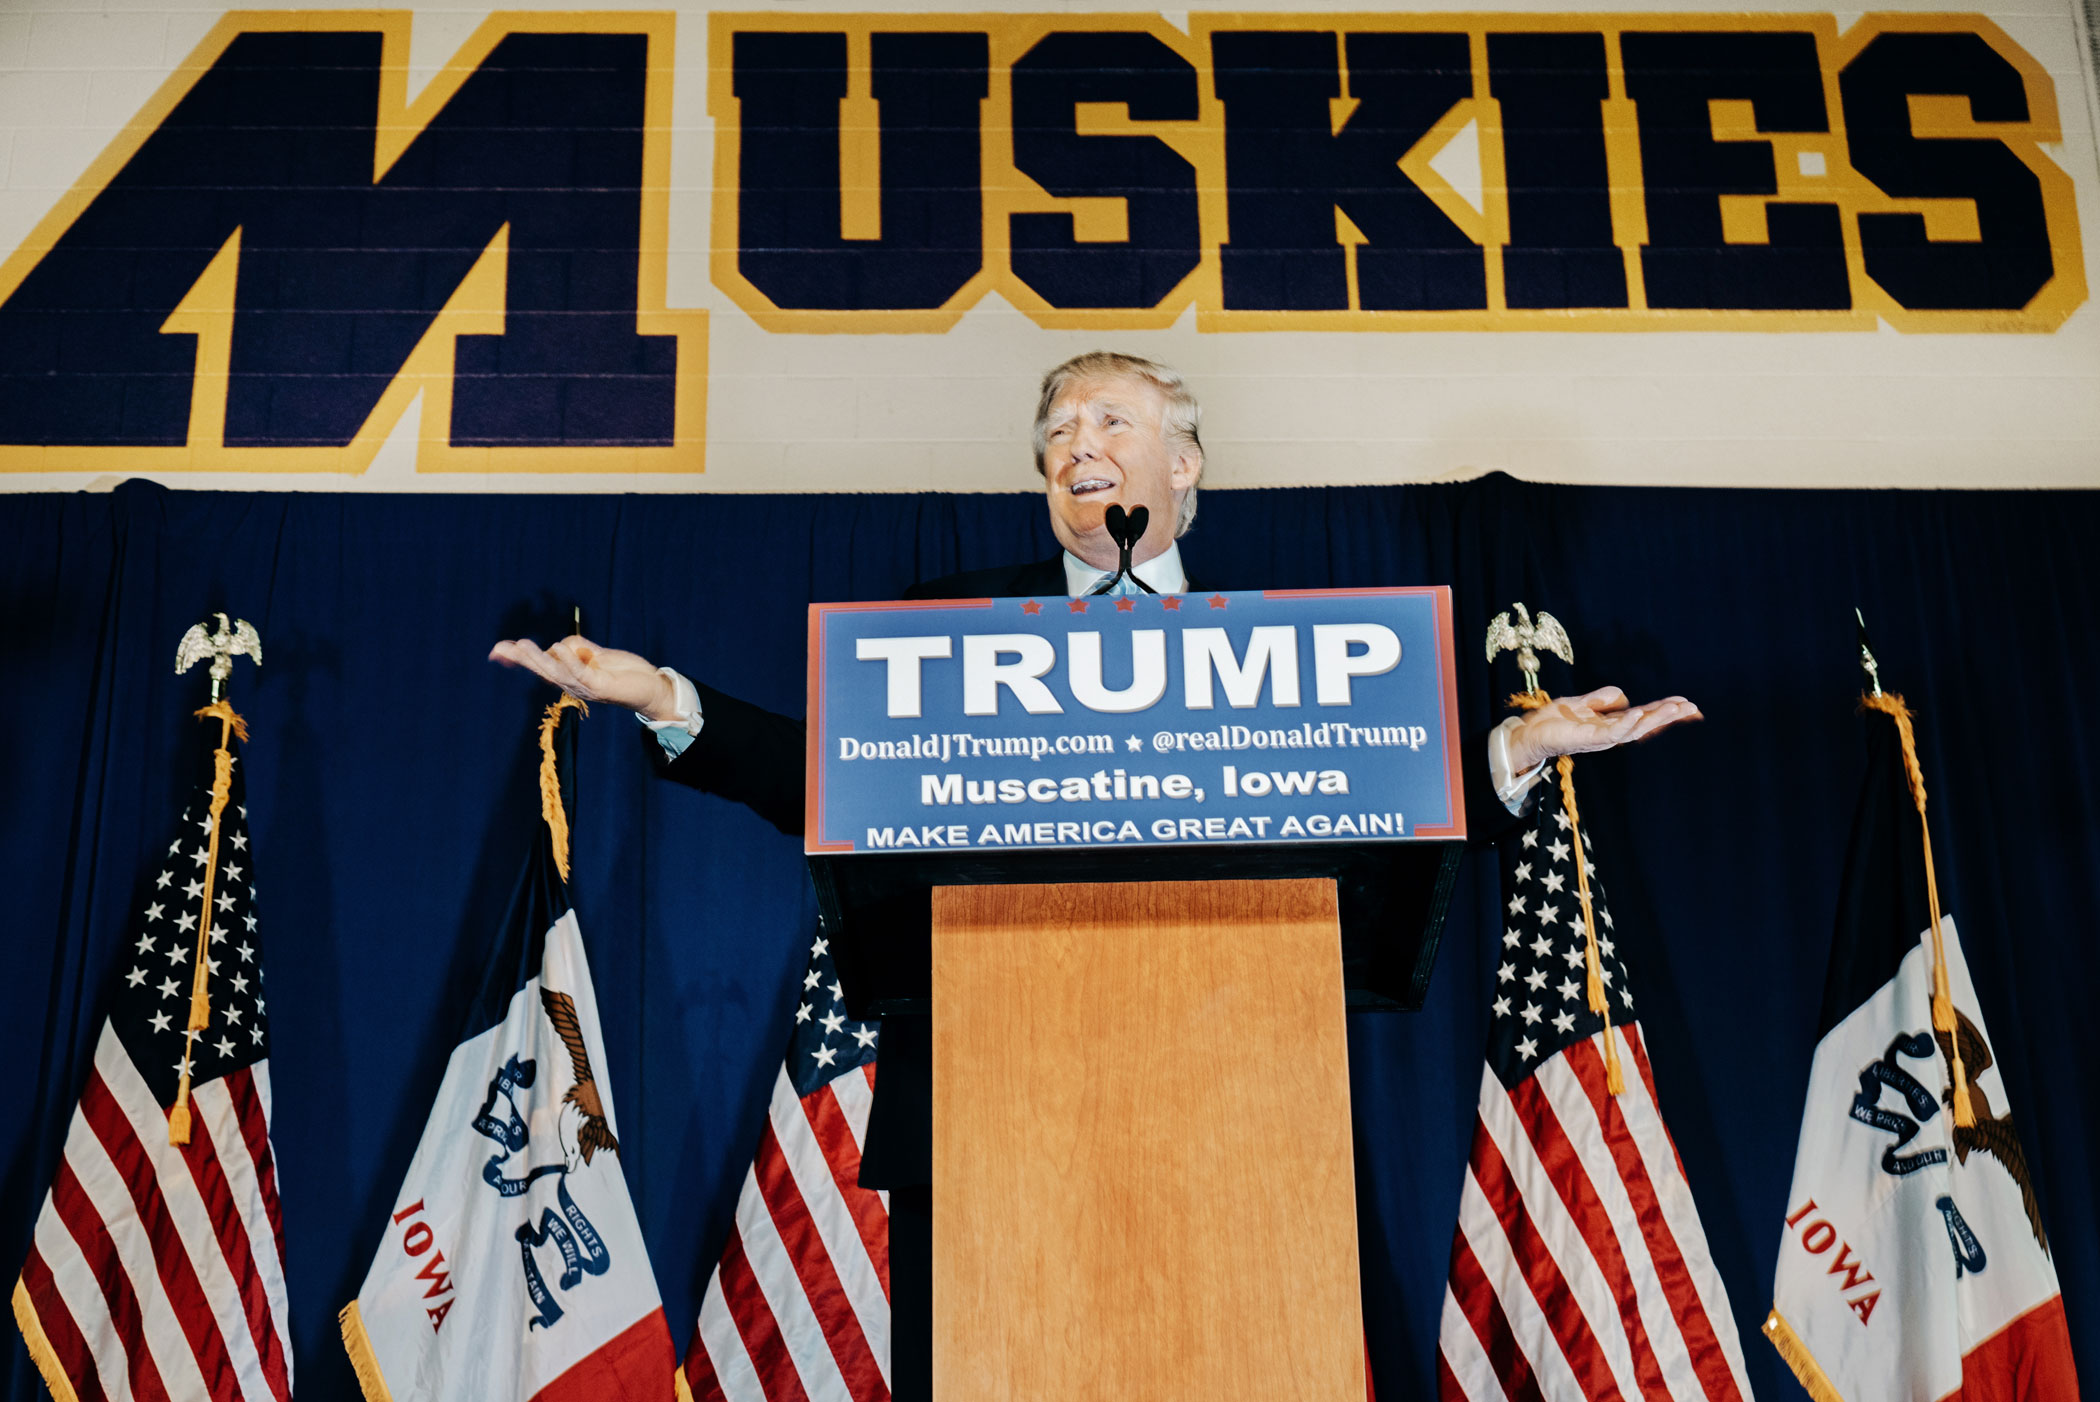 Donald Trump speaks at a campaign event in Muskatine, Iowa on Jan. 24, 2016.